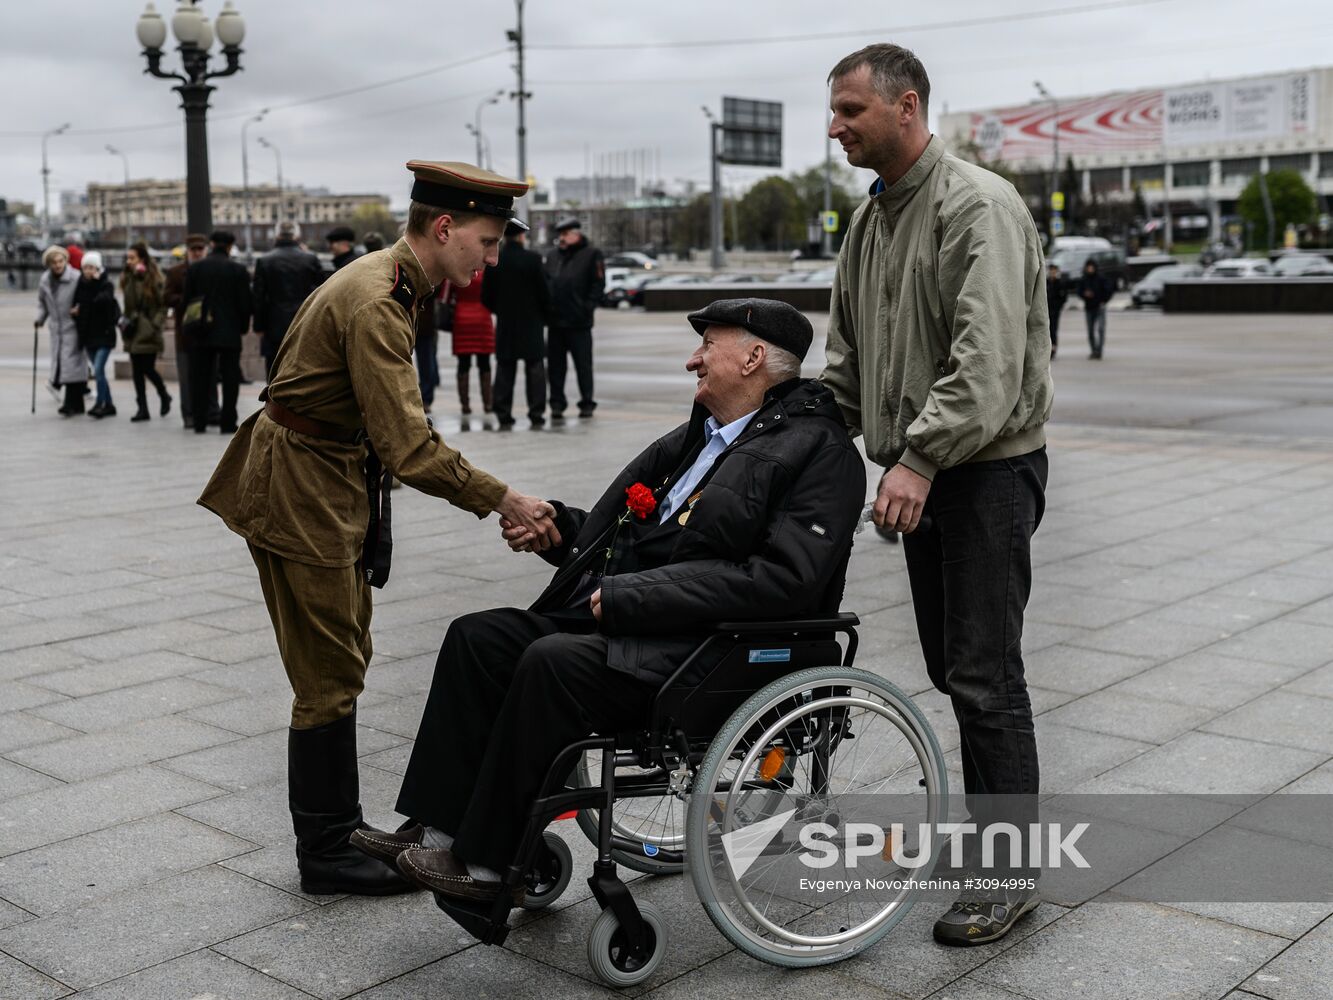 Victory Day celebrations in Moscow